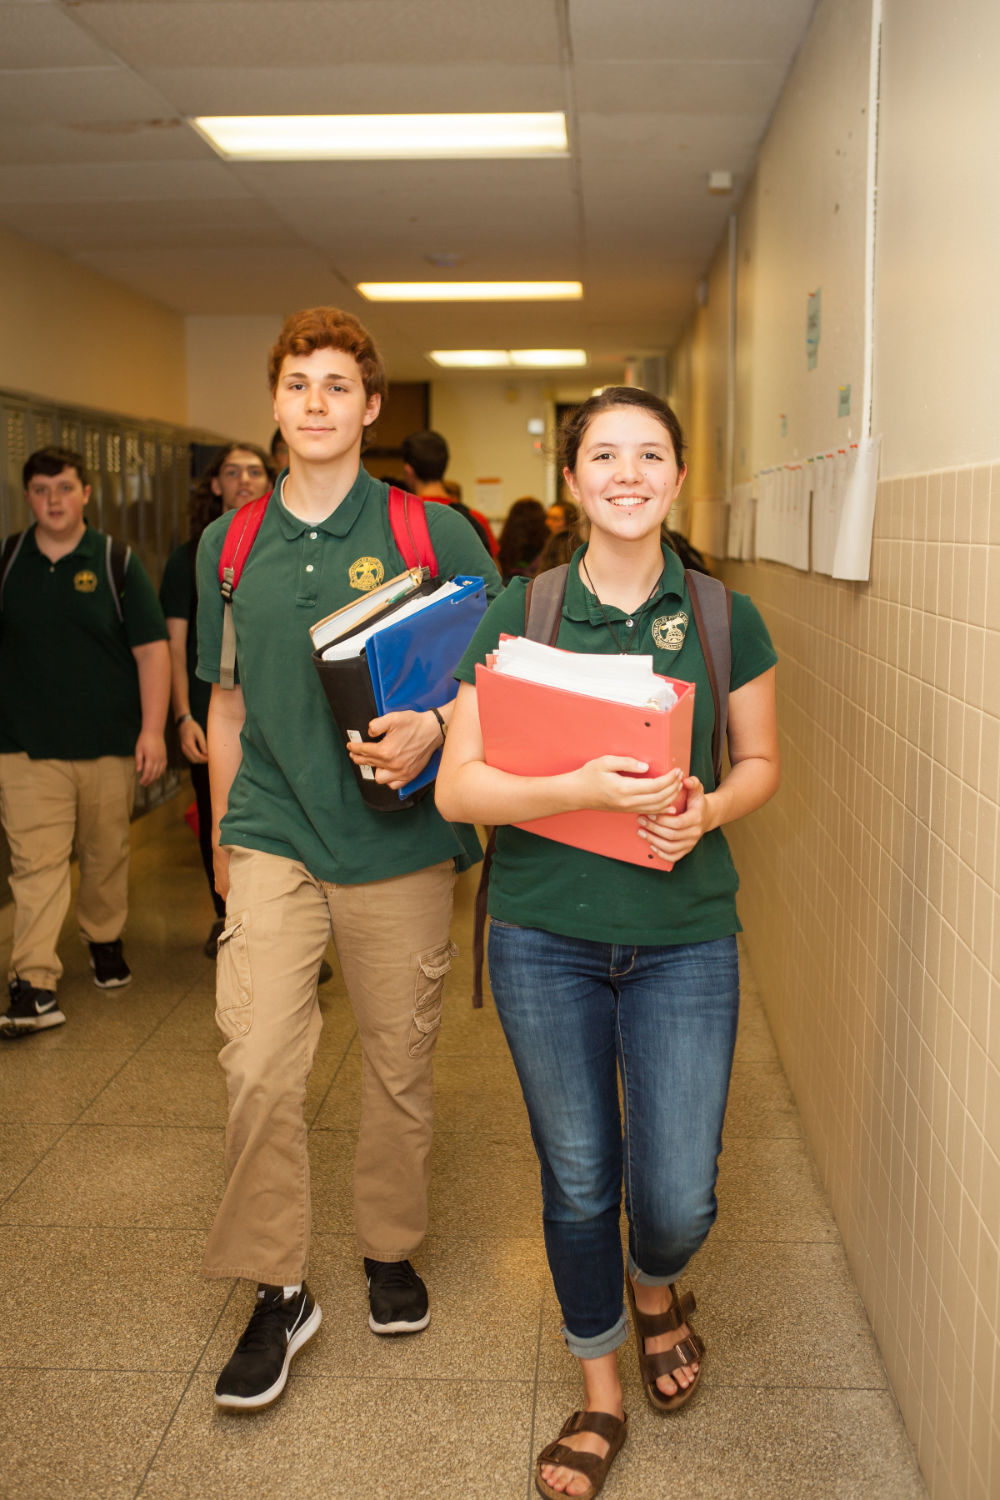 students in the halls of The Charles Finney School